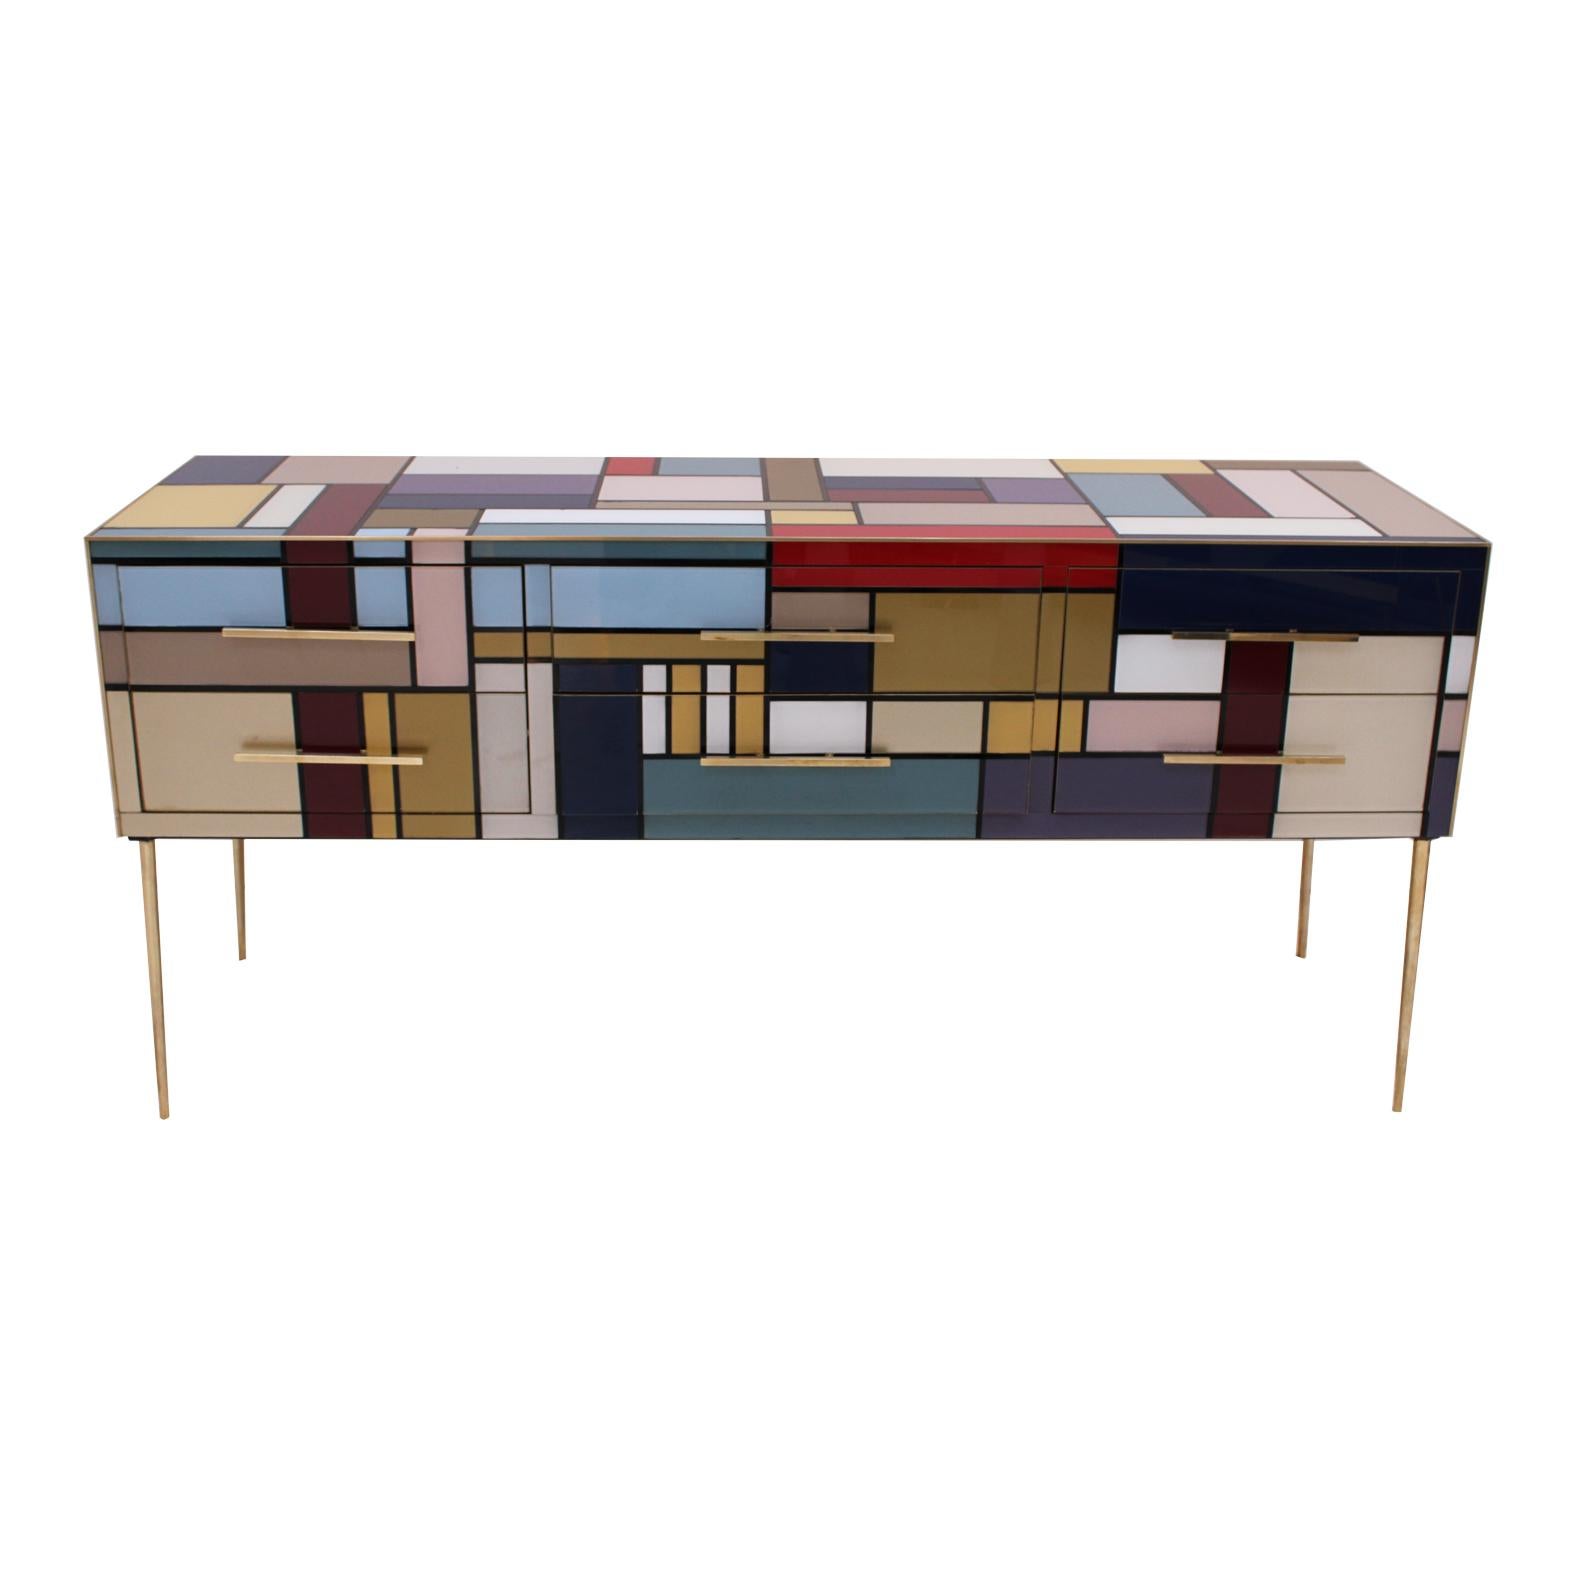 Italian sideboard with six drawers and four legs, with wooden structure covered in colored Murano glass, profiles, handles and feet in brass. Italian manufacture.

Production can last between 5 and 6 weeks.

Every item LA Studio offers is checked by